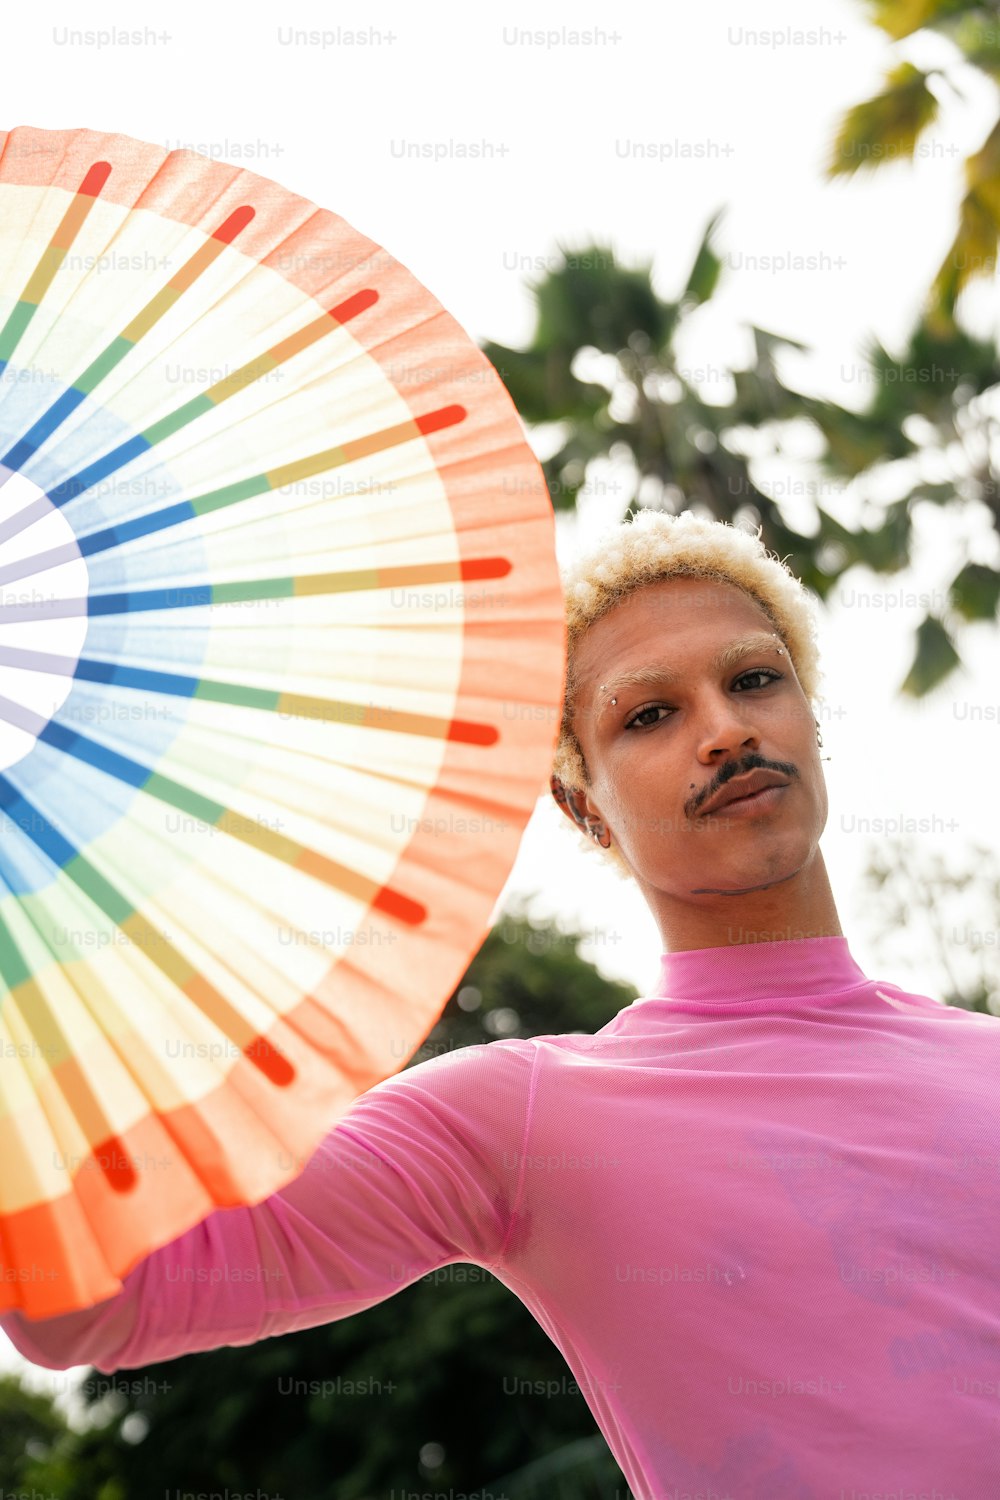 a man in a pink shirt holding a colorful umbrella